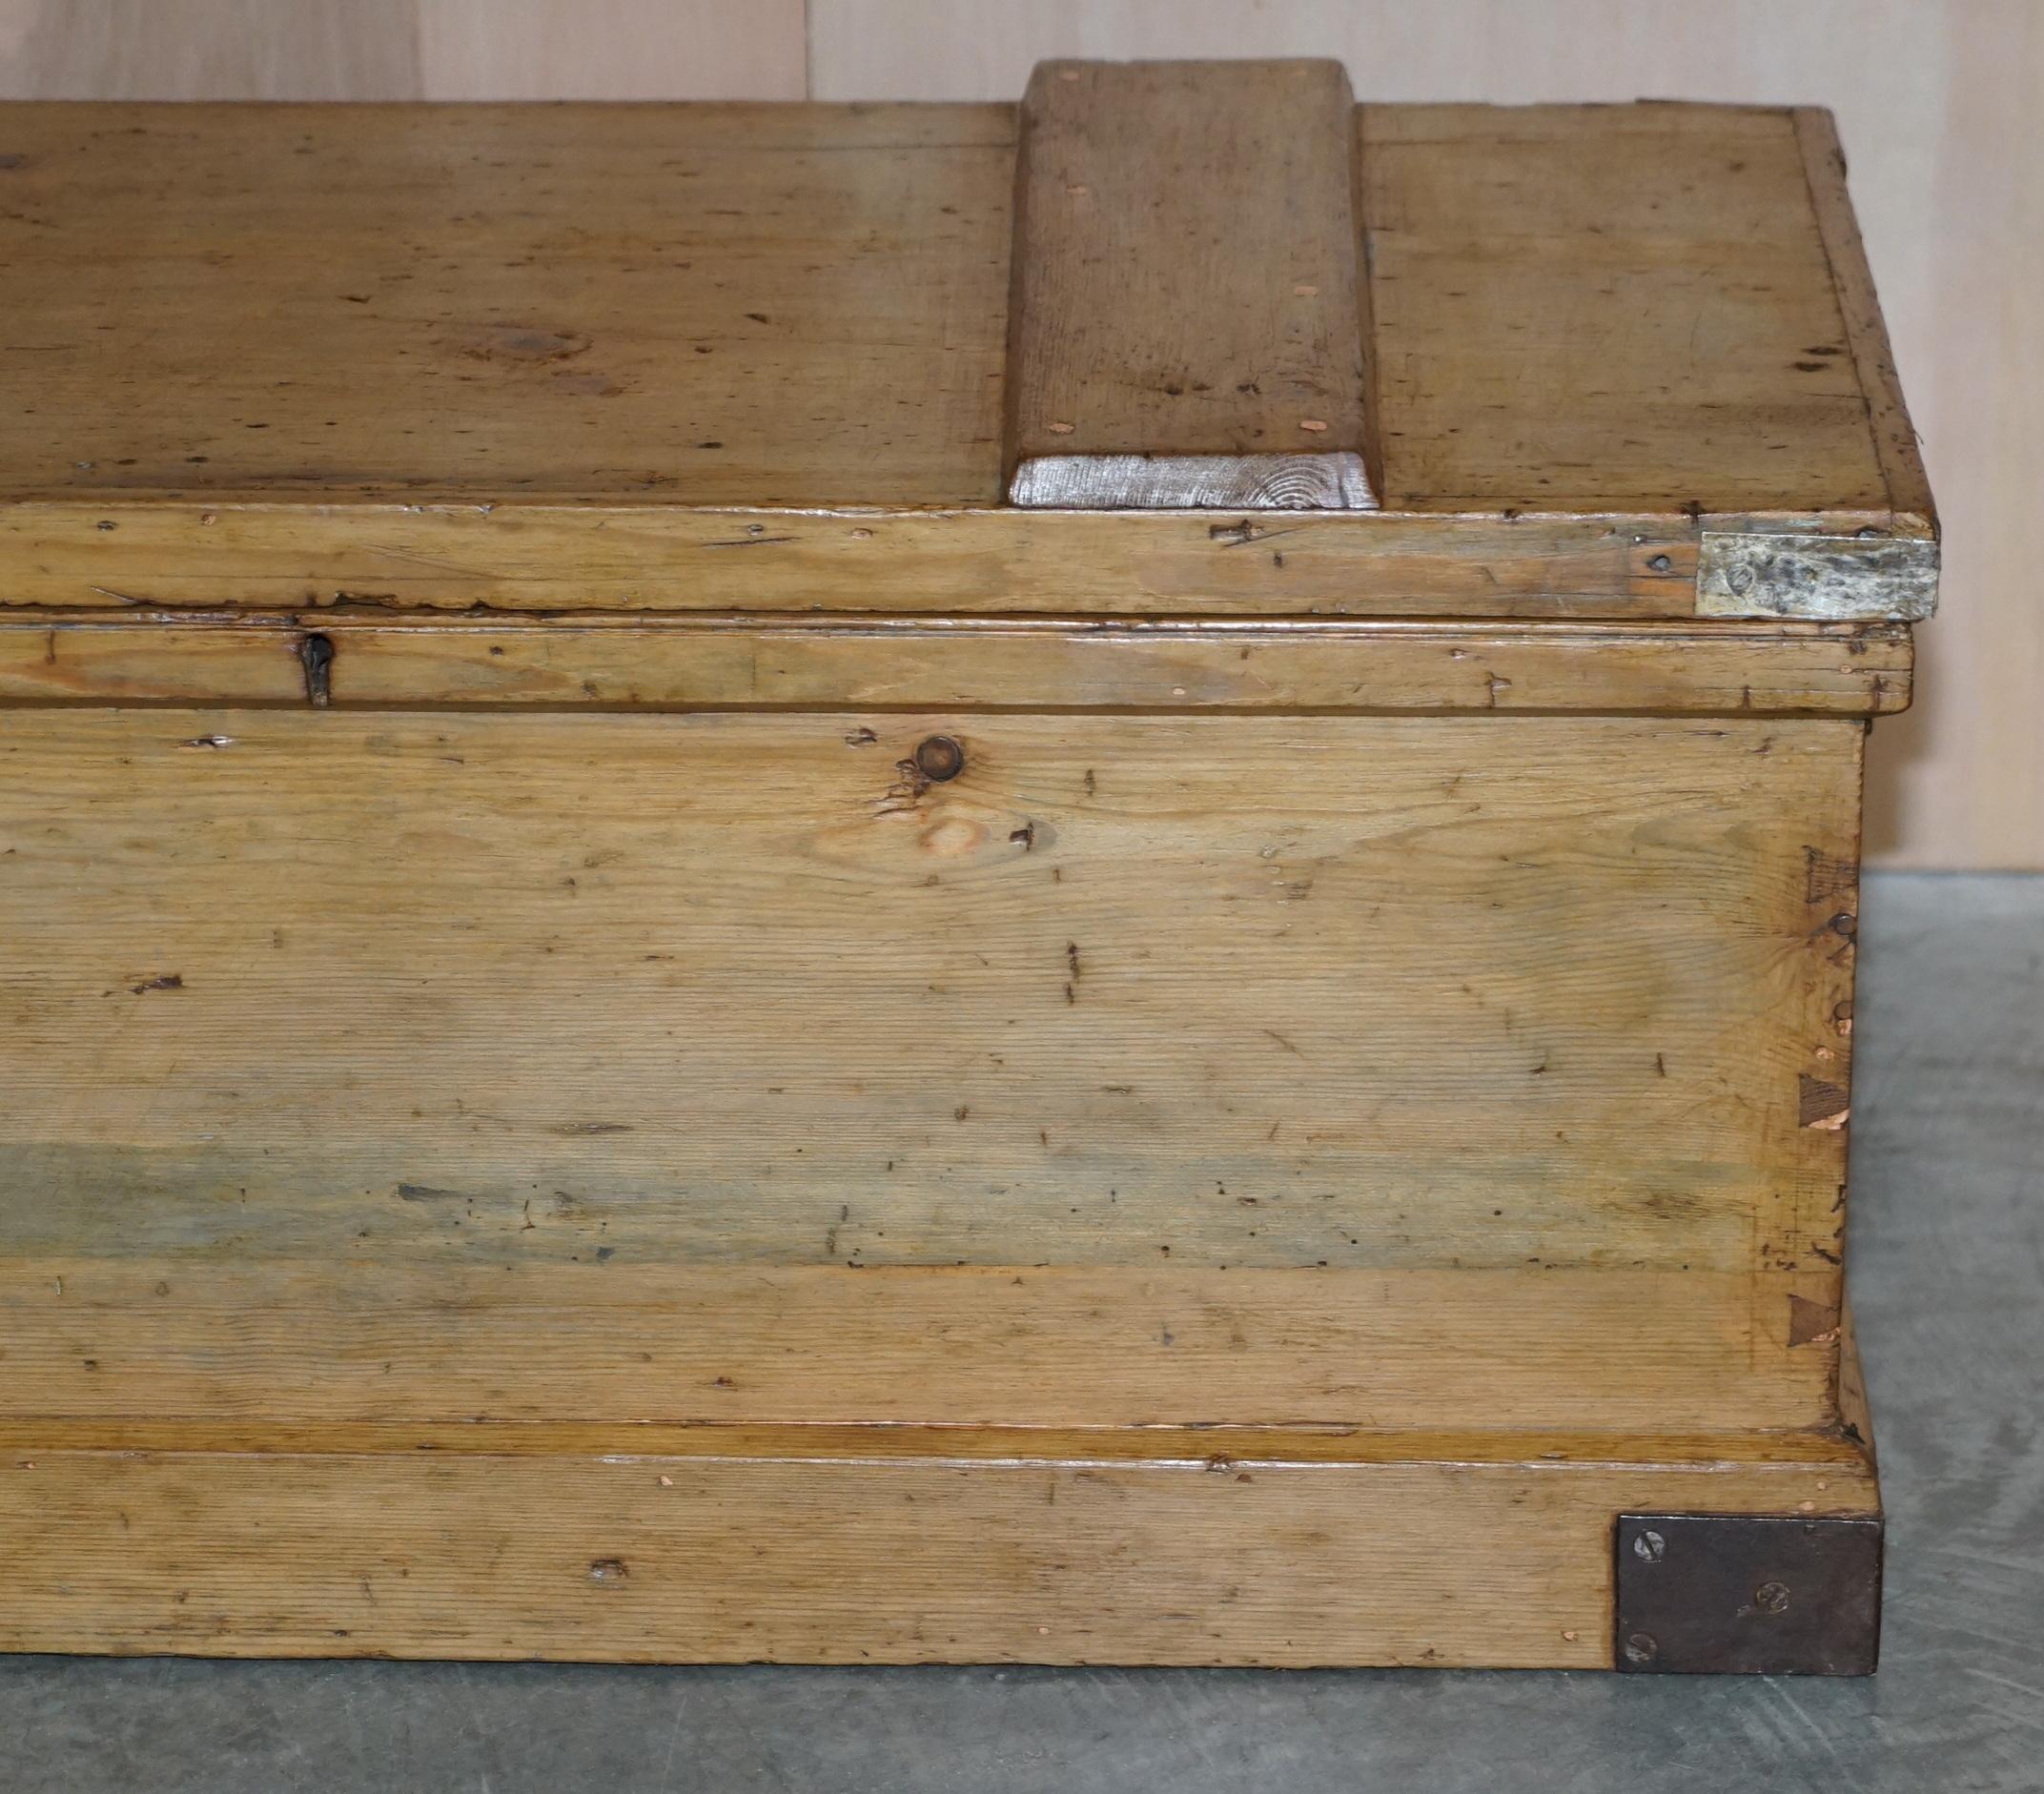 Antique Victorian Pine Military Campaign Blanket Box Chest Trunk Coffee Table For Sale 1